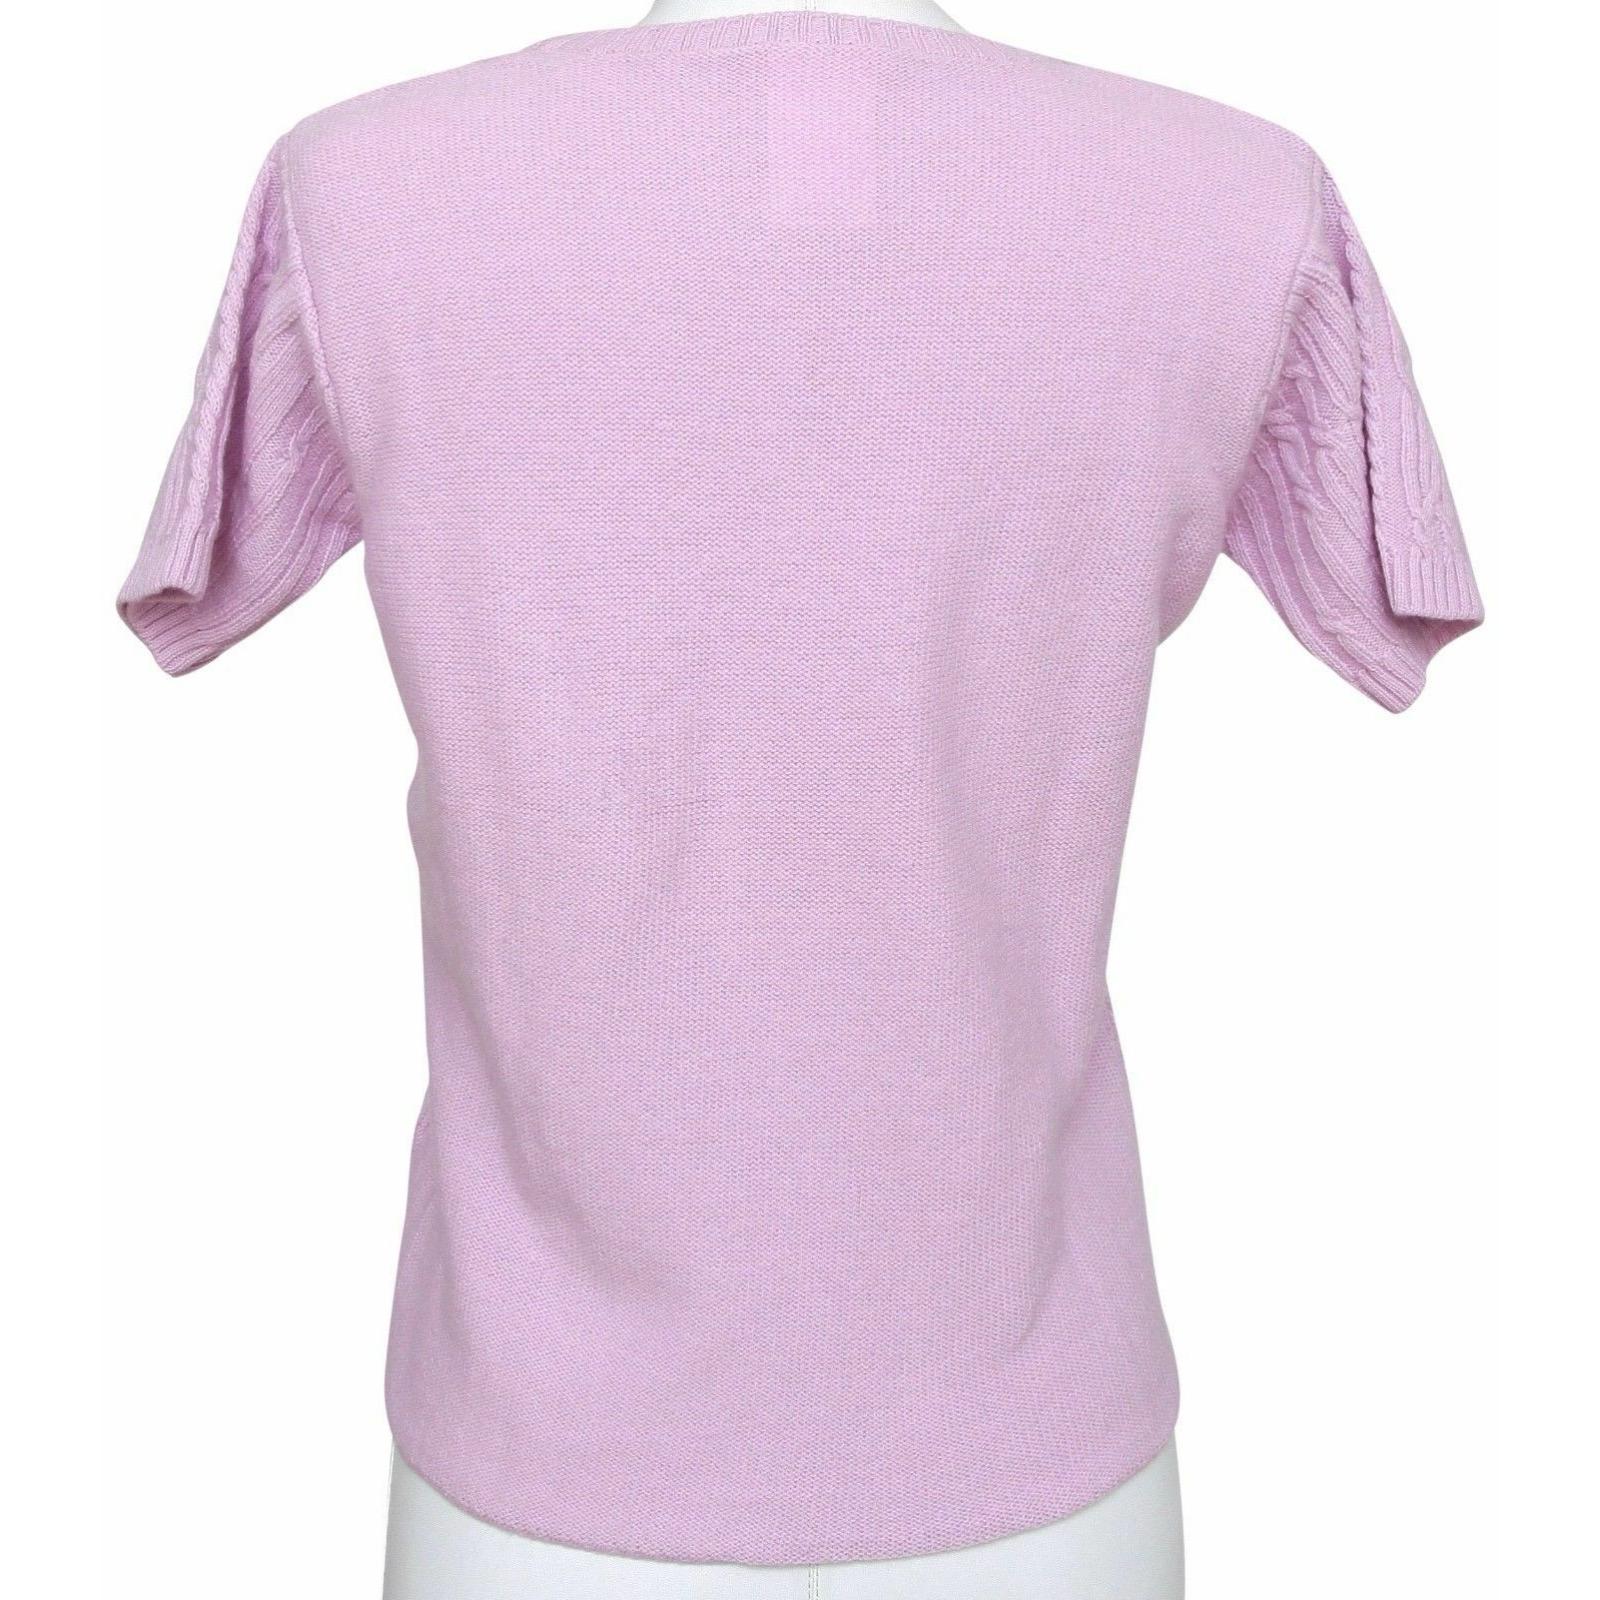 CHLOE Sweater Knit Short Sleeve Top Pink Crew Neck Wool Sz S For Sale 5